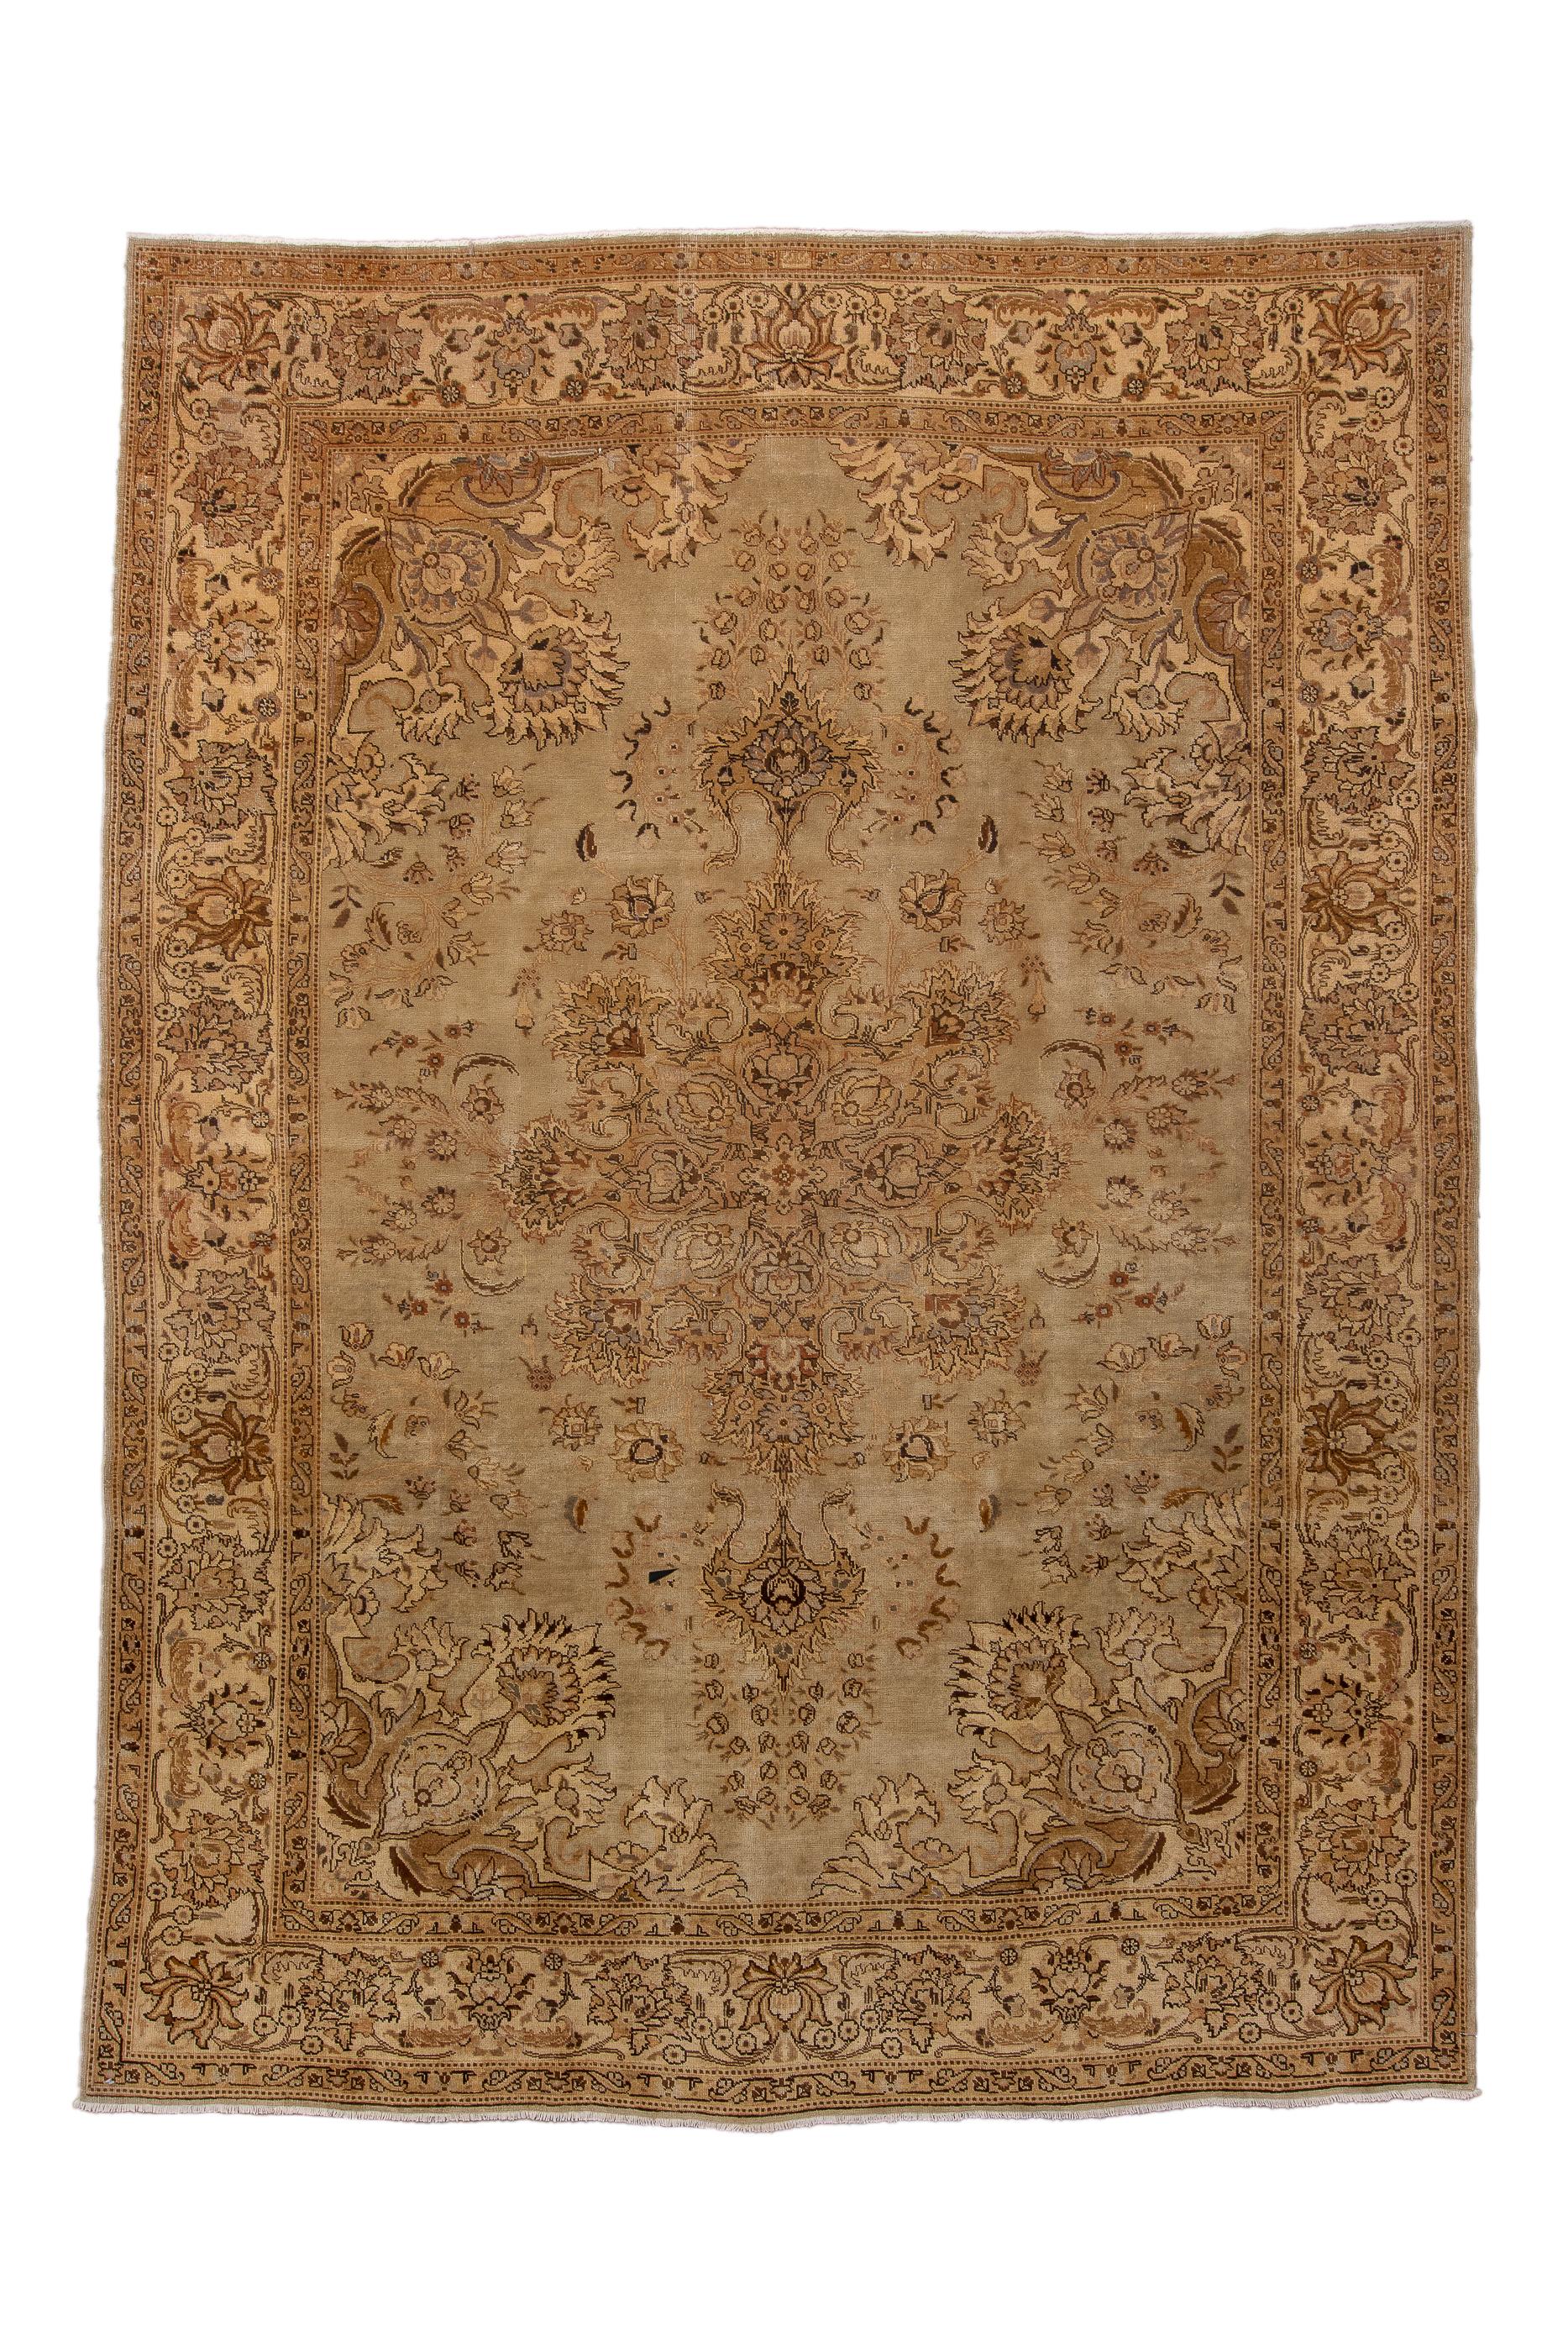 The oatmeal/buff field of this well-woven city carpet shows an elaborate, openwork and palmette medallion with palmette anchor pendants, surrounded by palmettes and detached floral sprays.  Vase and clawing leaf corners.  Straw main border with